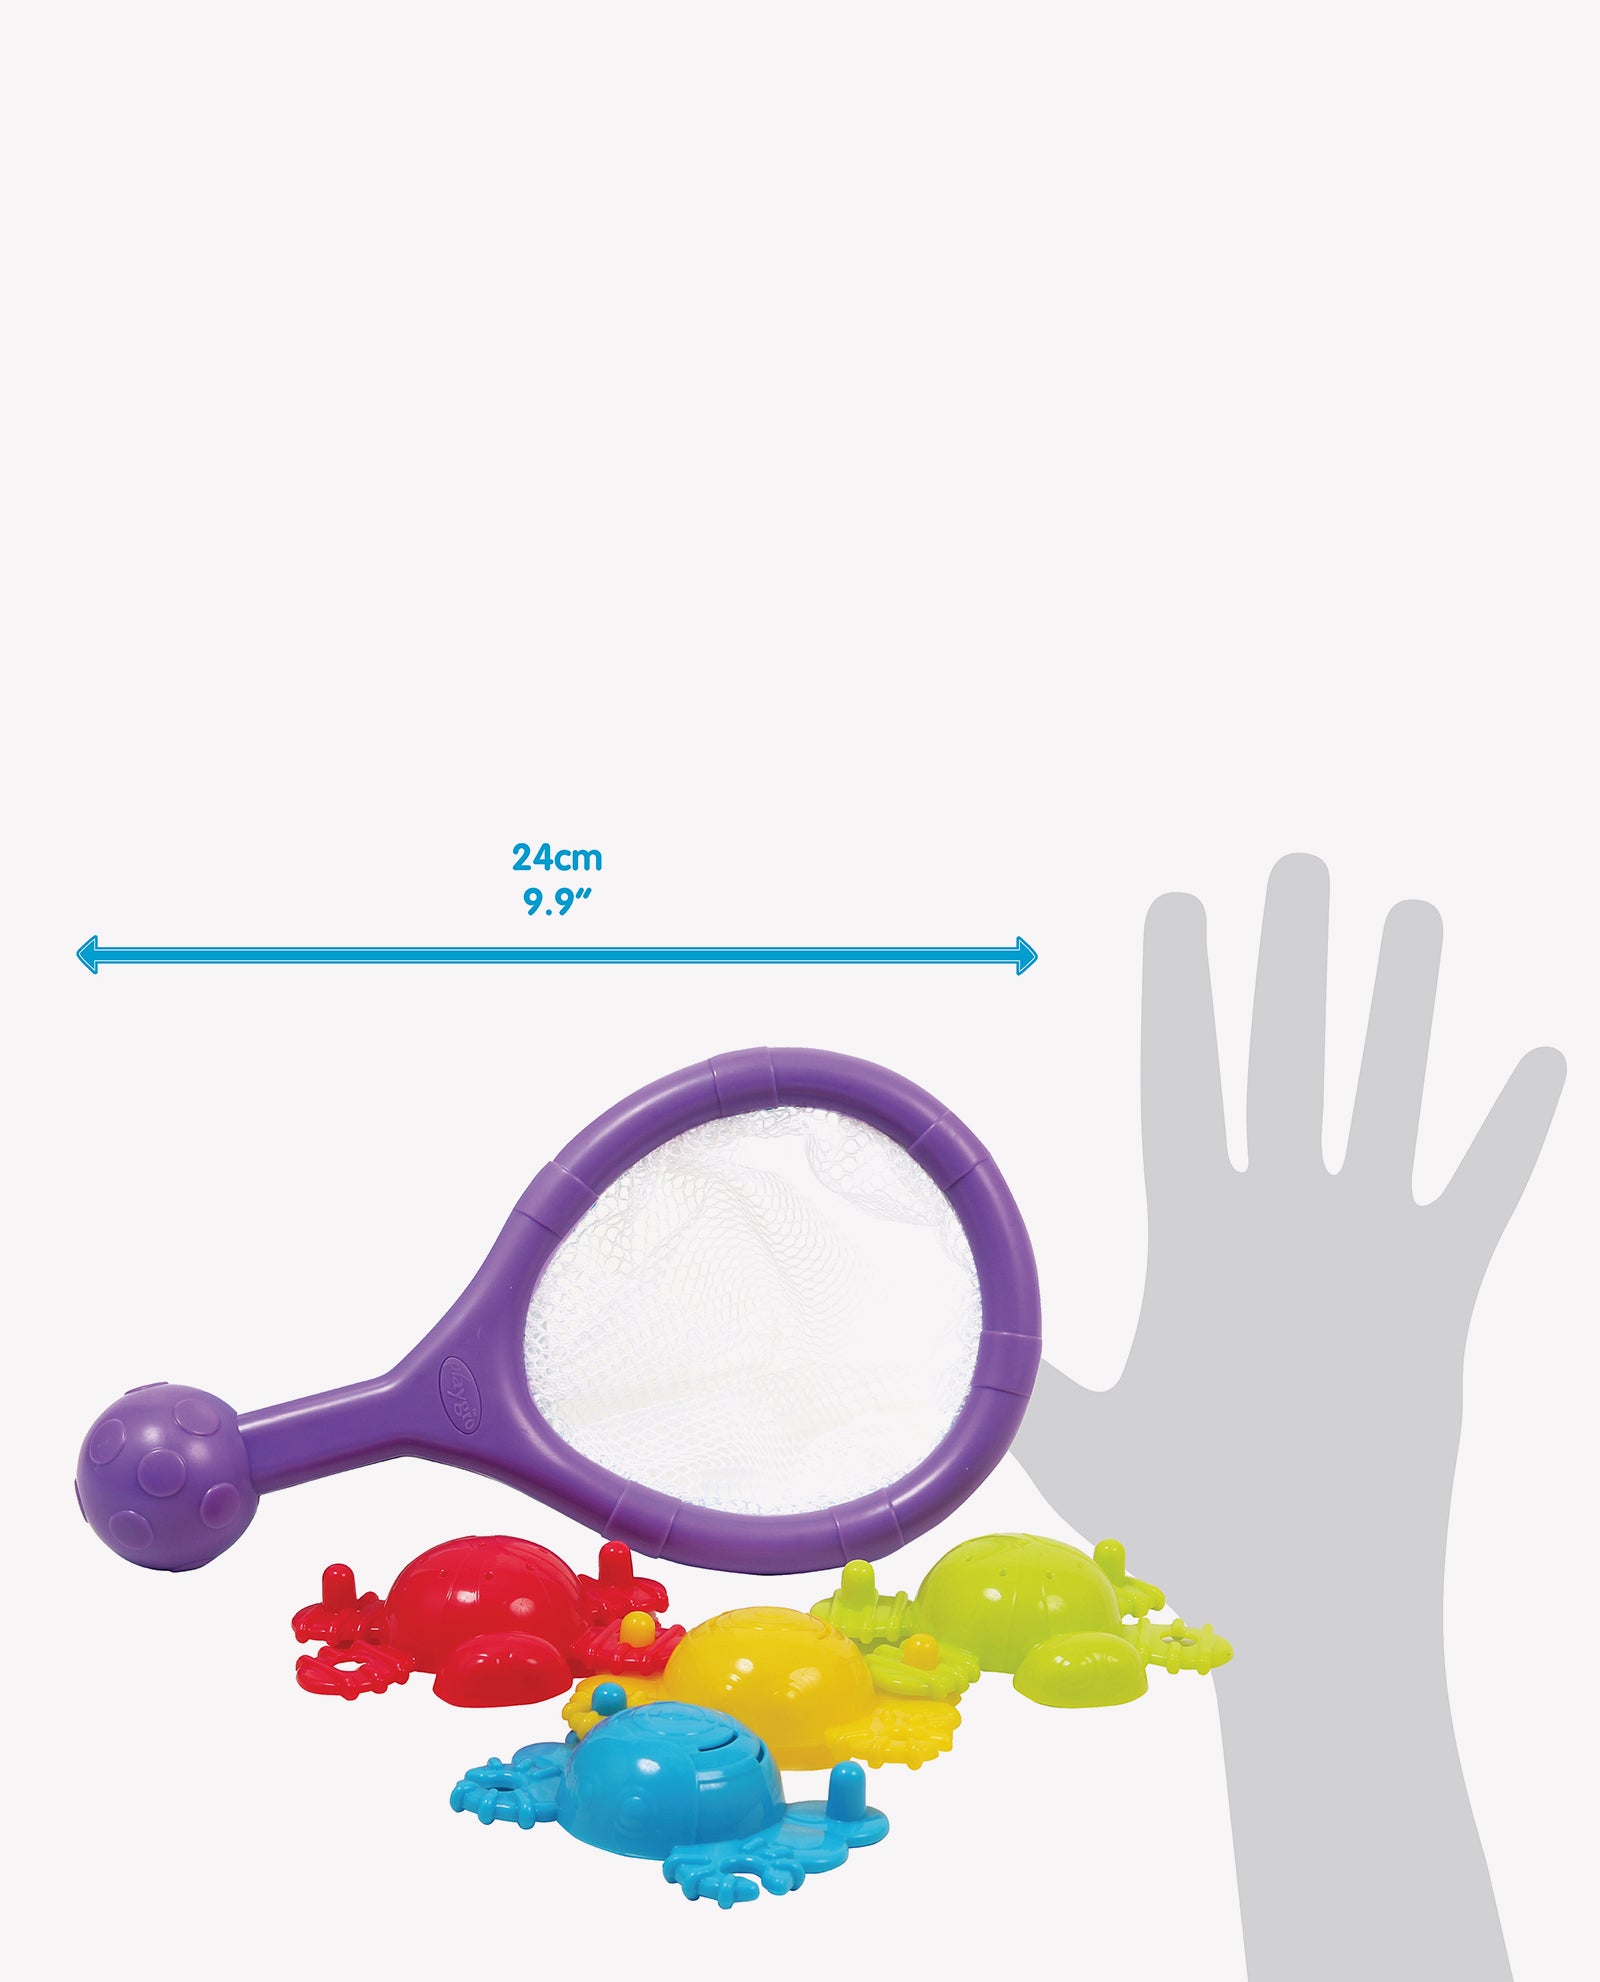 Playgro scoop and splash toy size chart in comparison to human hand